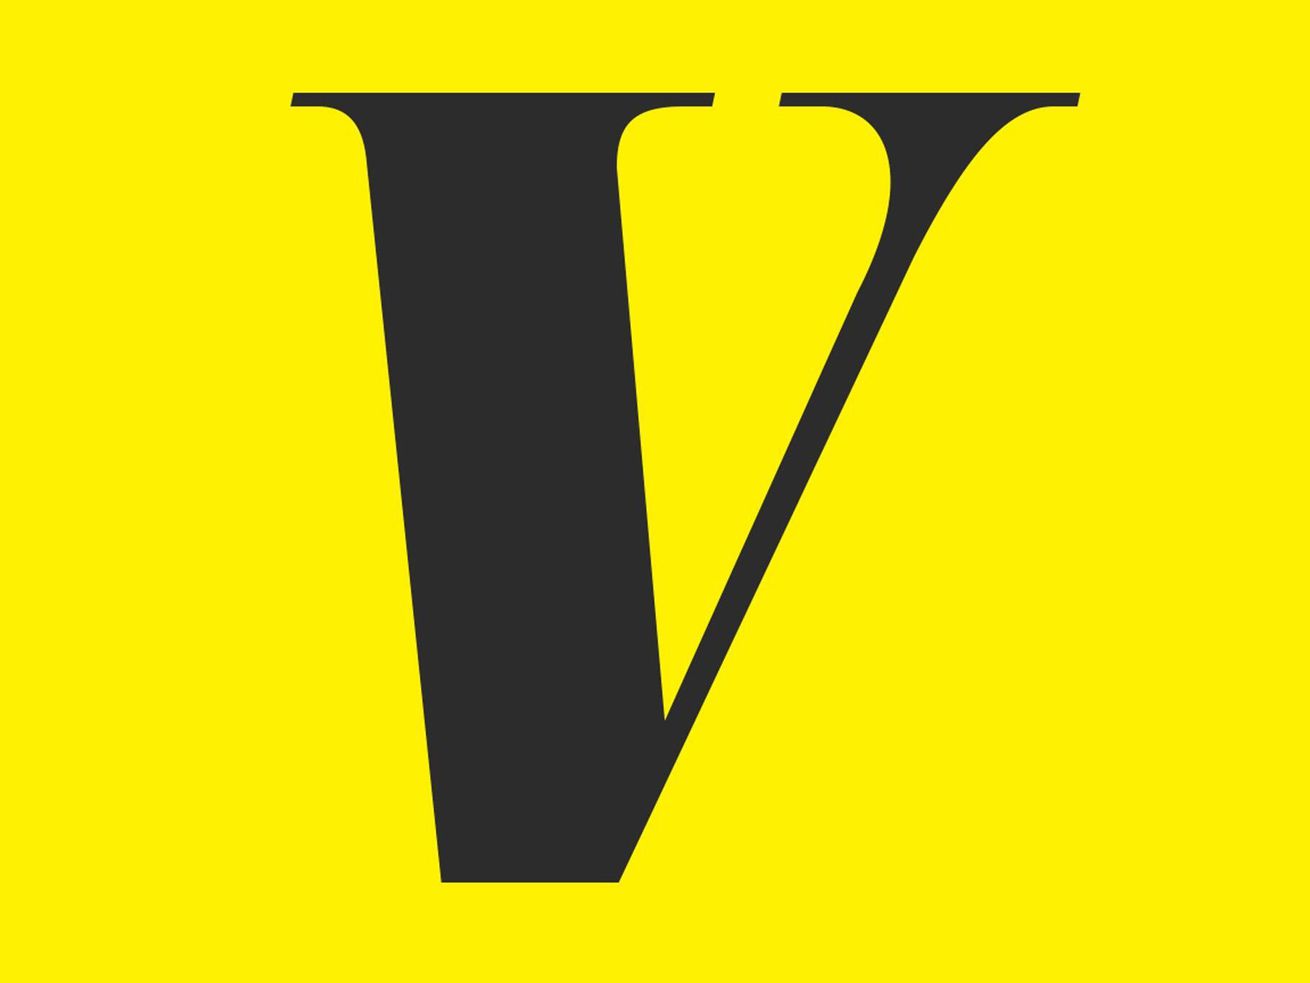 Vox Announces New Hires and Promotions